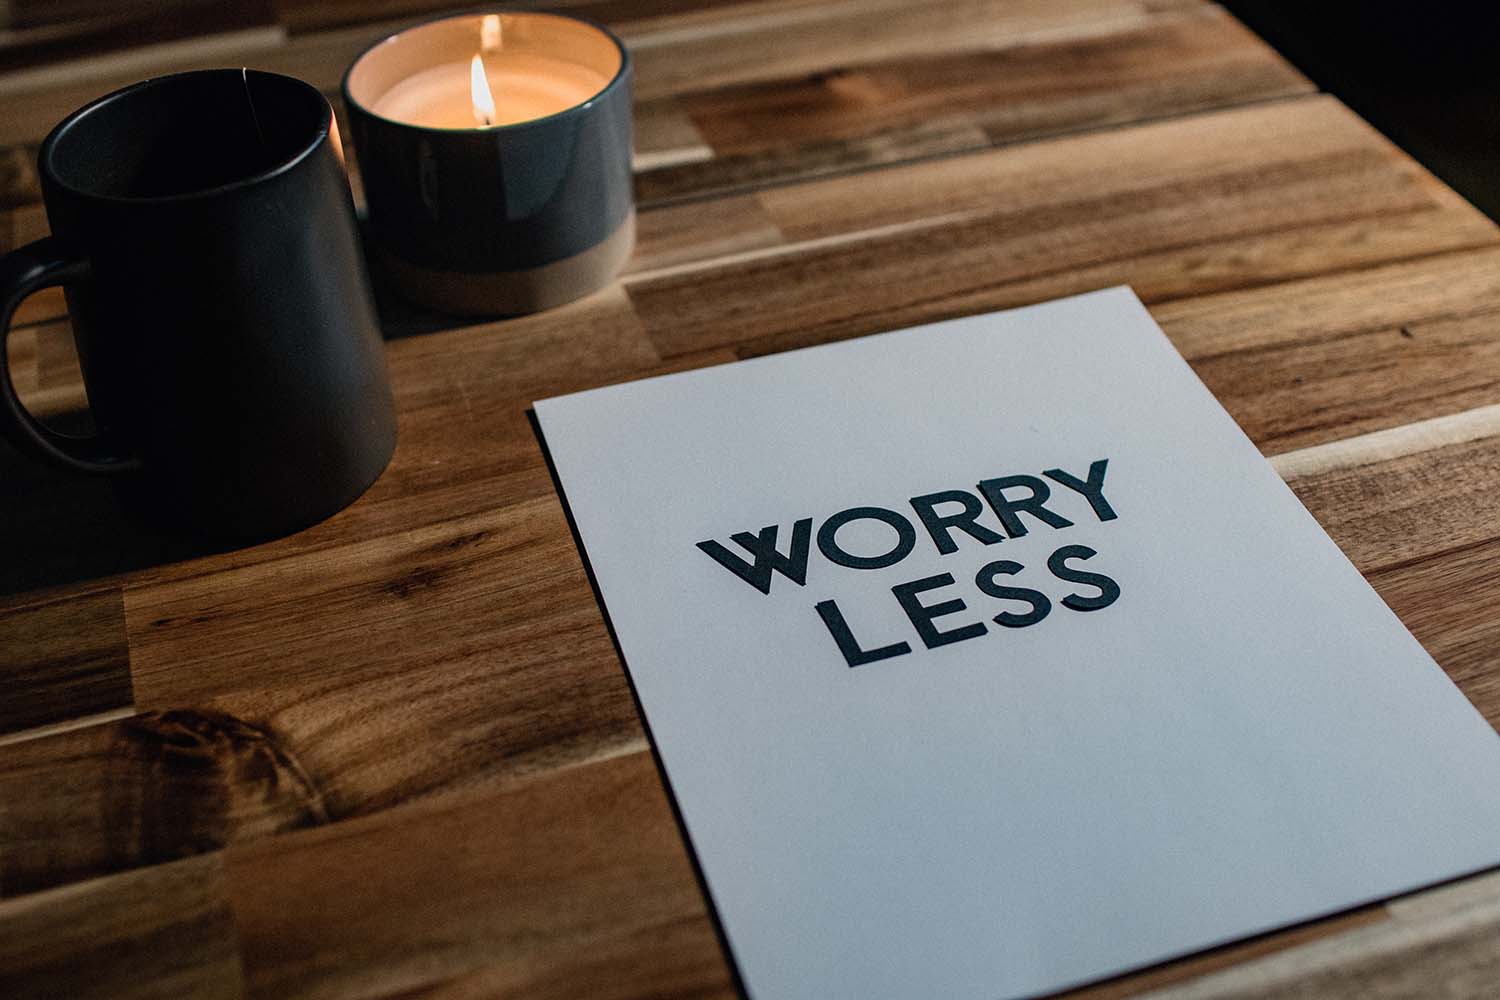 How to Fight Worry in Today's Busy Society